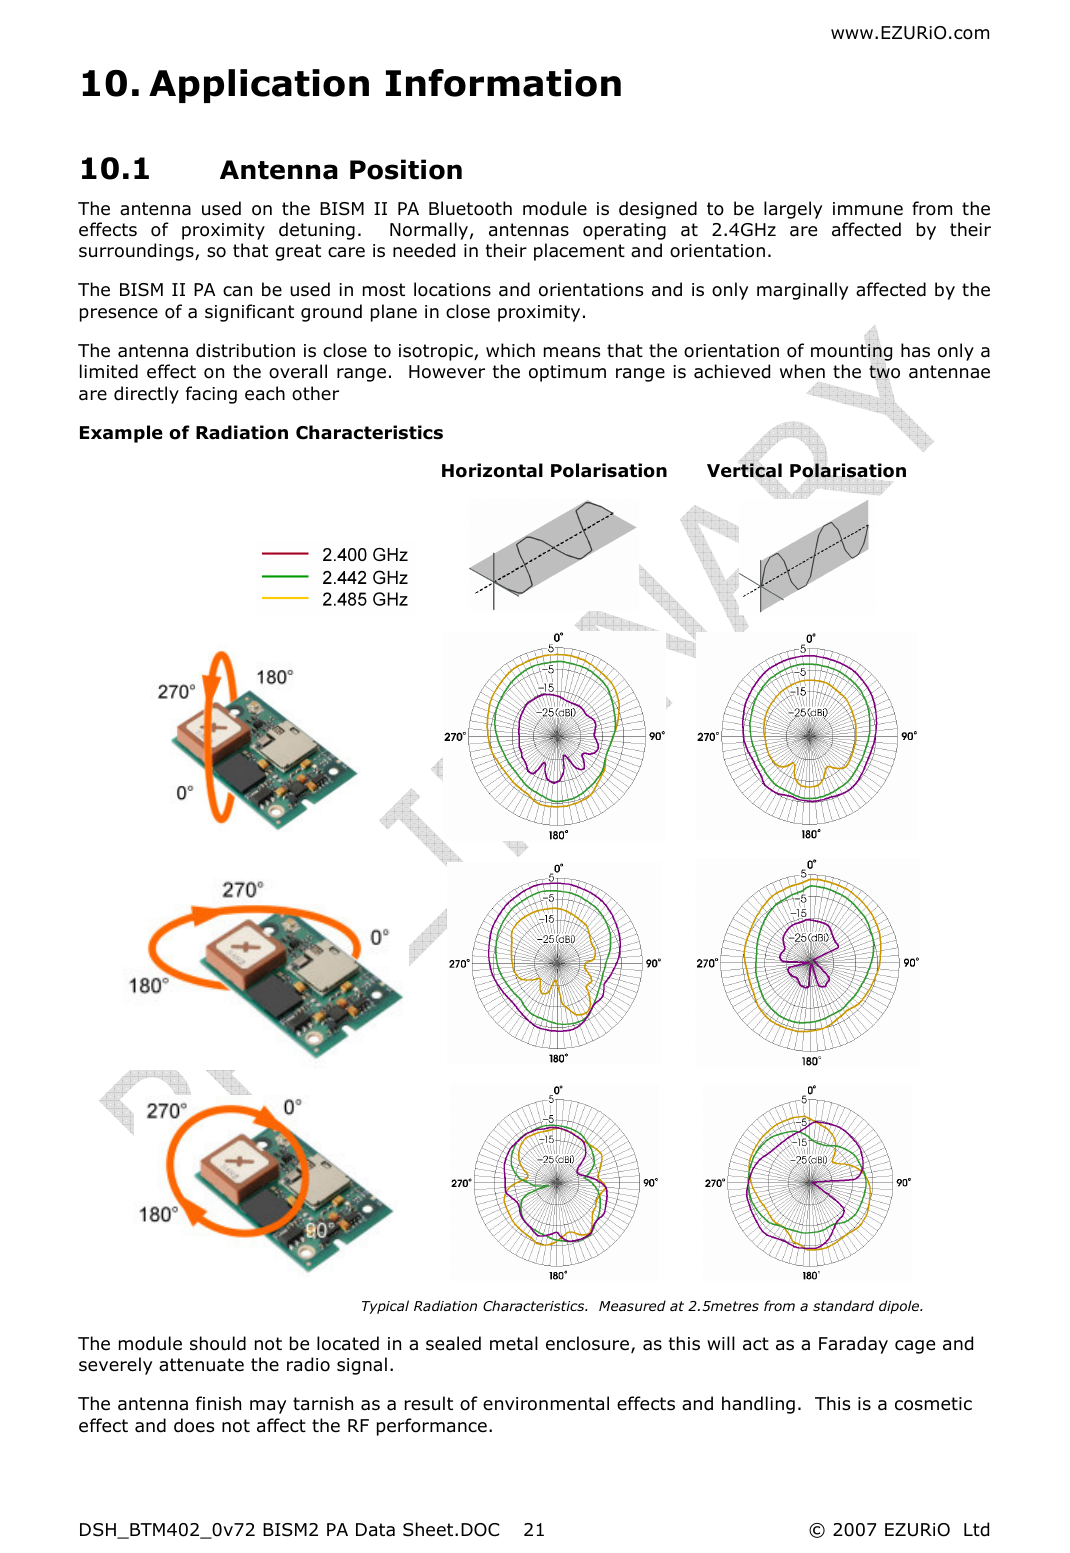 www.EZURiO.com DSH_BTM402_0v72 BISM2 PA Data Sheet.DOC  © 2007 EZURiO  Ltd  2110. Application Information 10.1 Antenna Position The  antenna  used  on  the  BISM II  PA  Bluetooth  module is  designed  to  be  largely  immune  from  the effects  of  proximity  detuning.    Normally,  antennas  operating  at  2.4GHz  are  affected  by  their surroundings, so that great care is needed in their placement and orientation. The BISM II PA can be used in most locations and orientations and is only marginally affected by the presence of a significant ground plane in close proximity. The antenna distribution is close to isotropic, which means that the orientation of mounting has only a limited effect on the overall range.  However the optimum range is achieved when the two antennae are directly facing each other Example of Radiation Characteristics  Horizontal Polarisation  Vertical Polarisation            Typical Radiation Characteristics.  Measured at 2.5metres from a standard dipole.                  The module should not be located in a sealed metal enclosure, as this will act as a Faraday cage and severely attenuate the radio signal. The antenna finish may tarnish as a result of environmental effects and handling.  This is a cosmetic effect and does not affect the RF performance.  